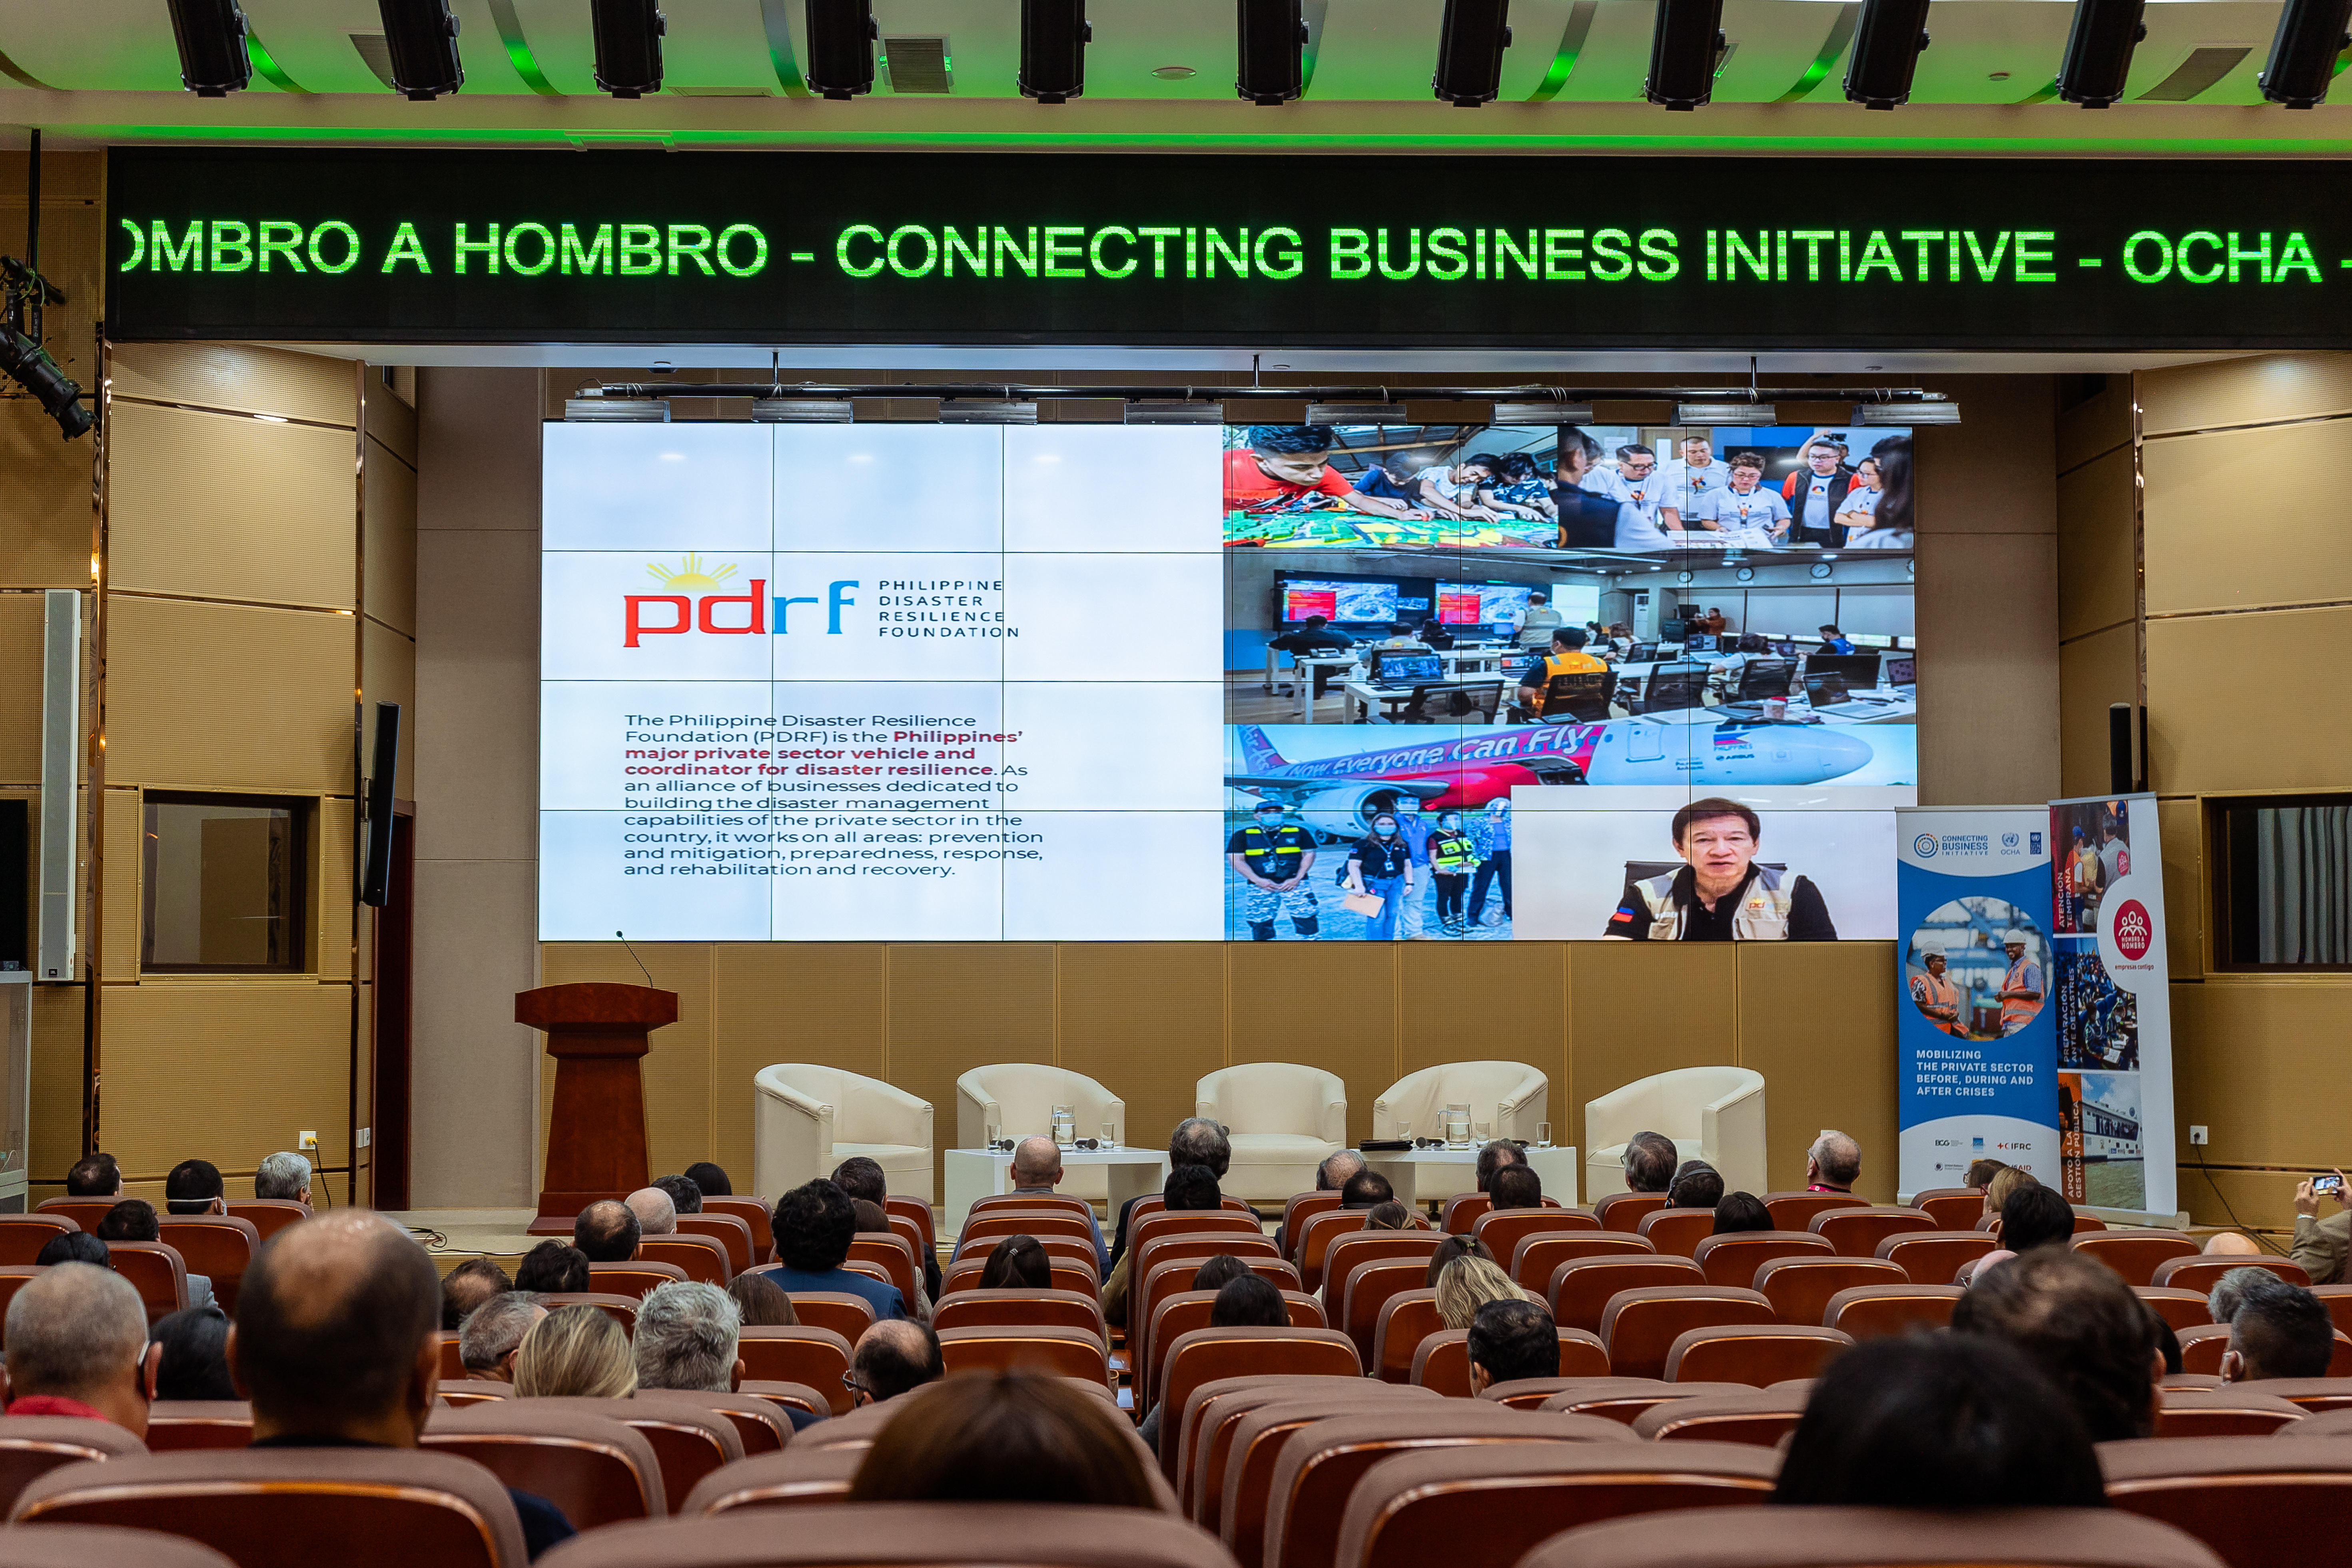 Hombro a Hombro launch in Lima, Peru on 27 September 2022.